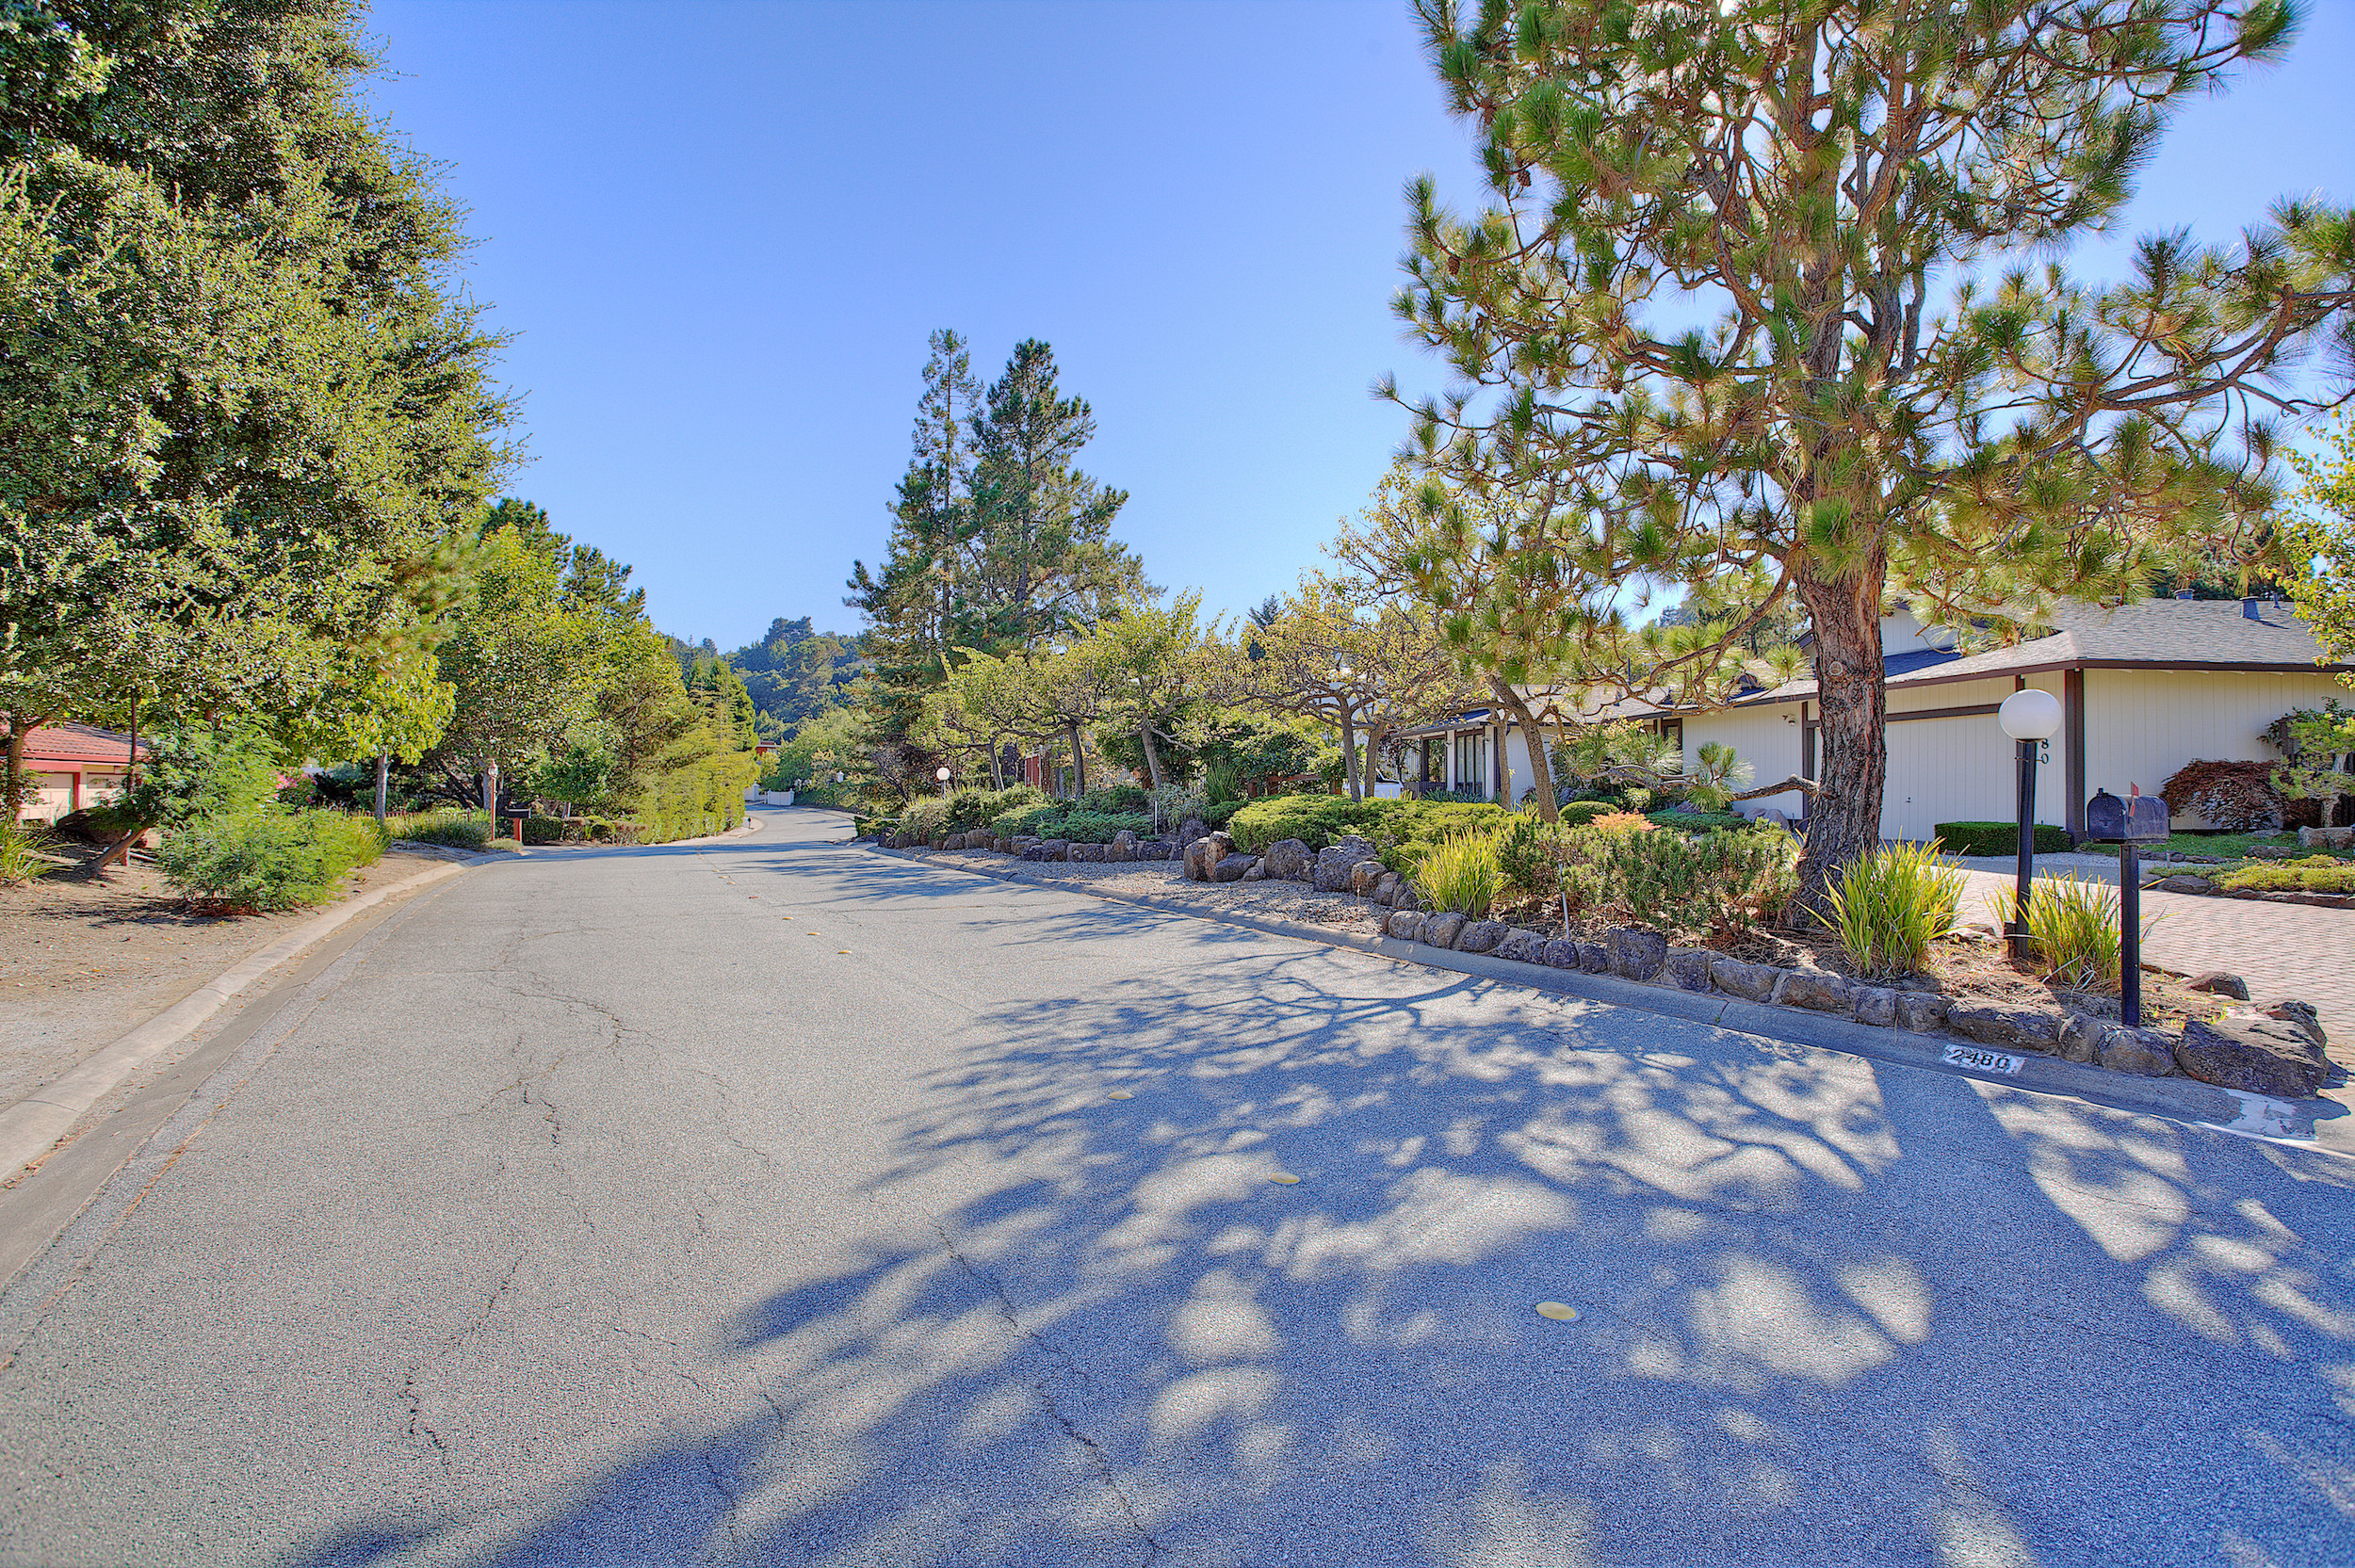 Street with a home in Hillsborough Hills